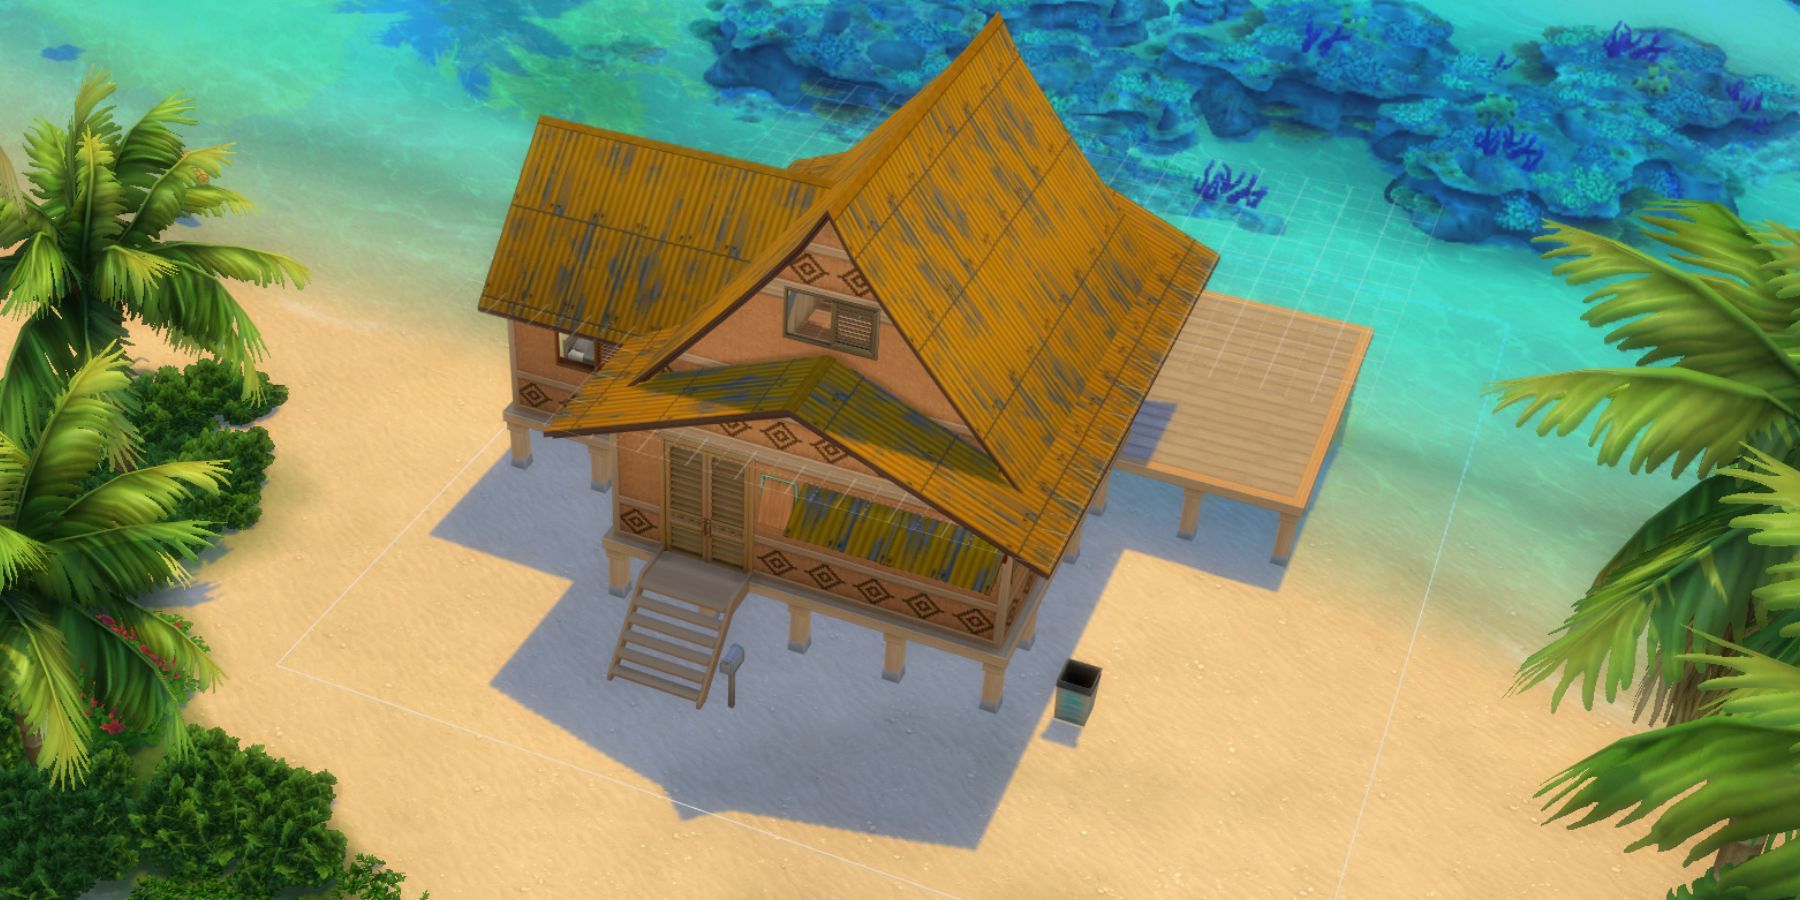 The Sims 4 Roof